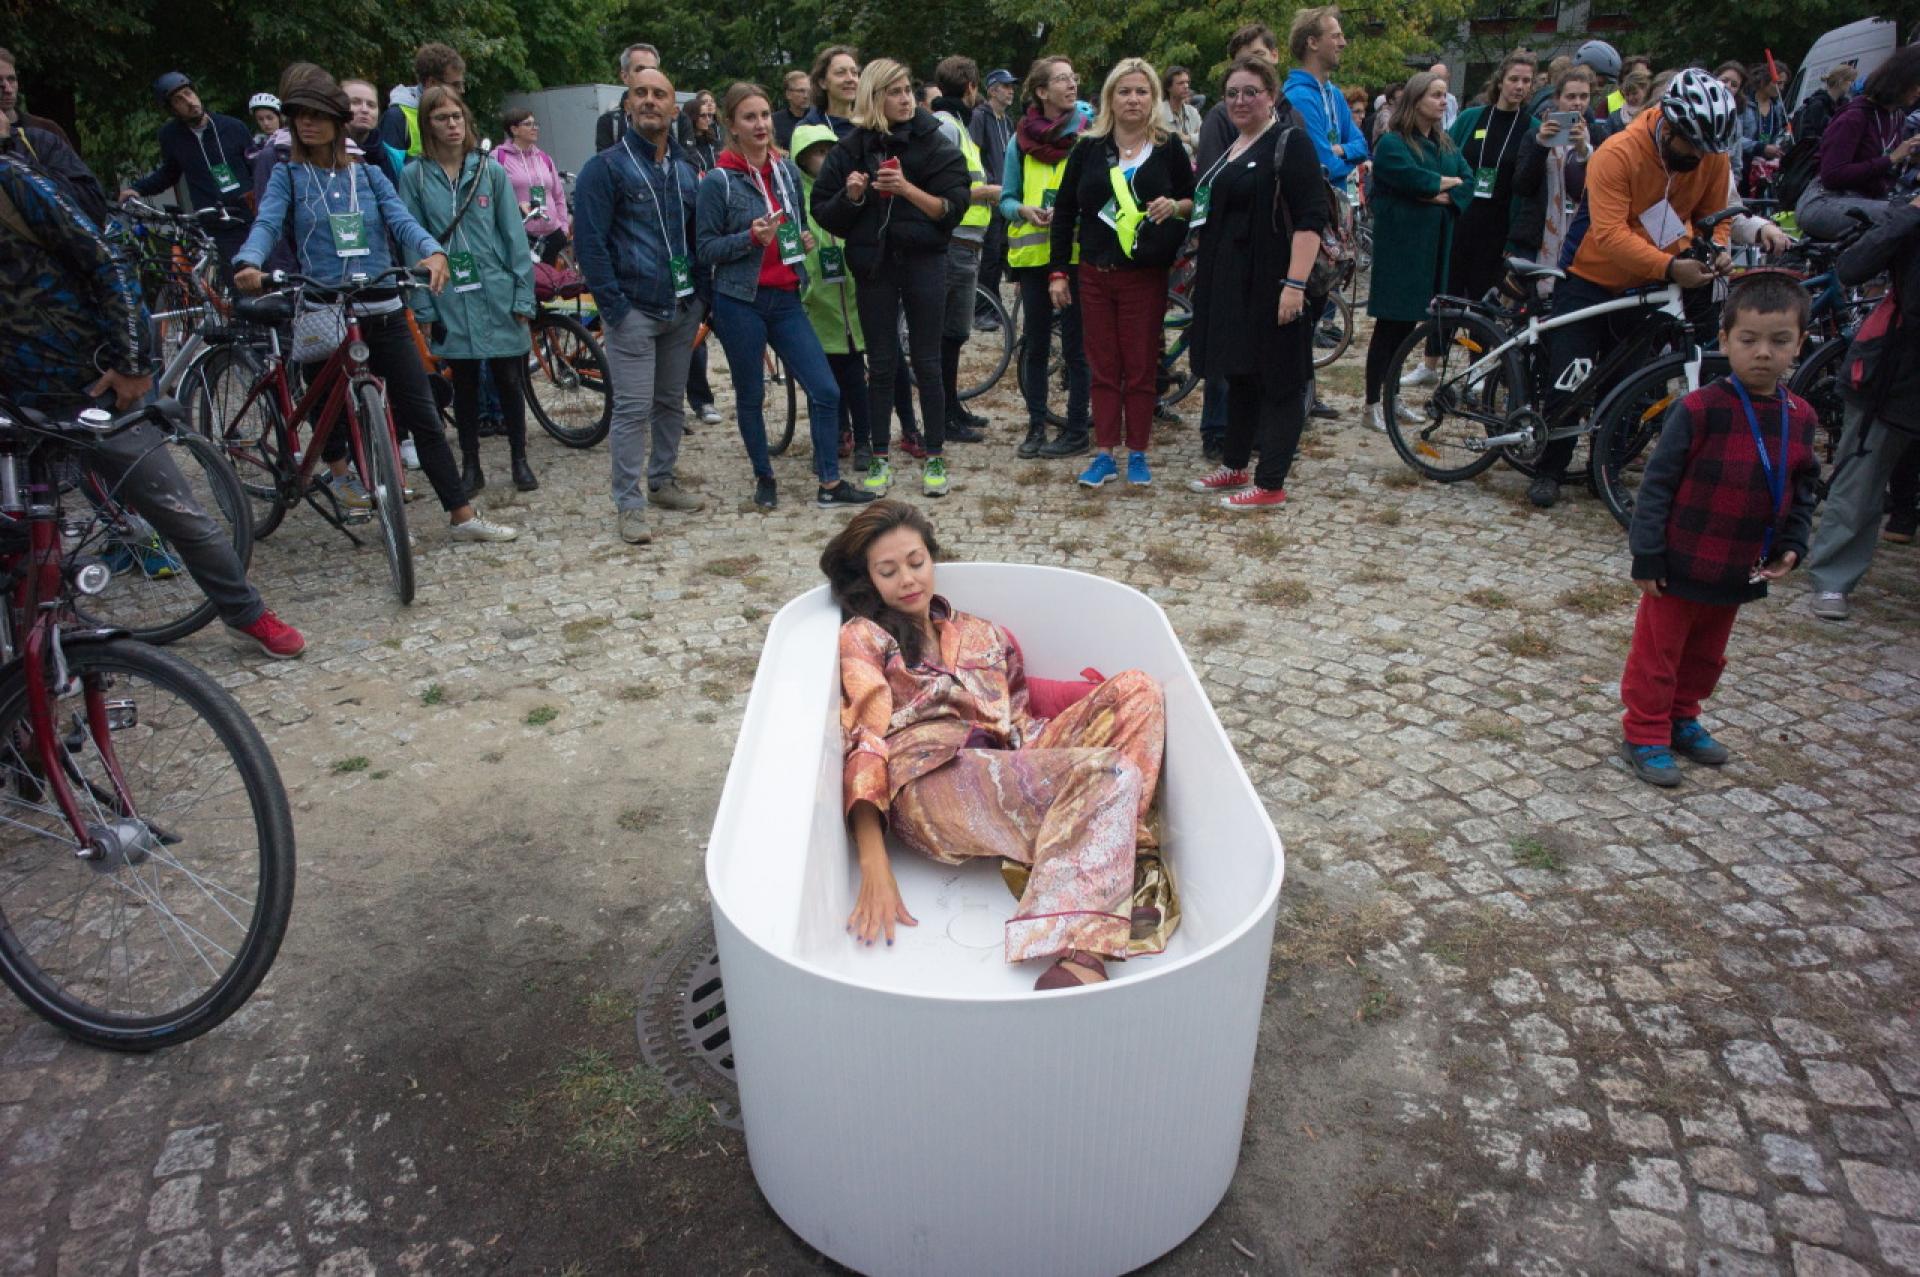 Why was Mies sleeping in the bath tube - a performance during the first stop.